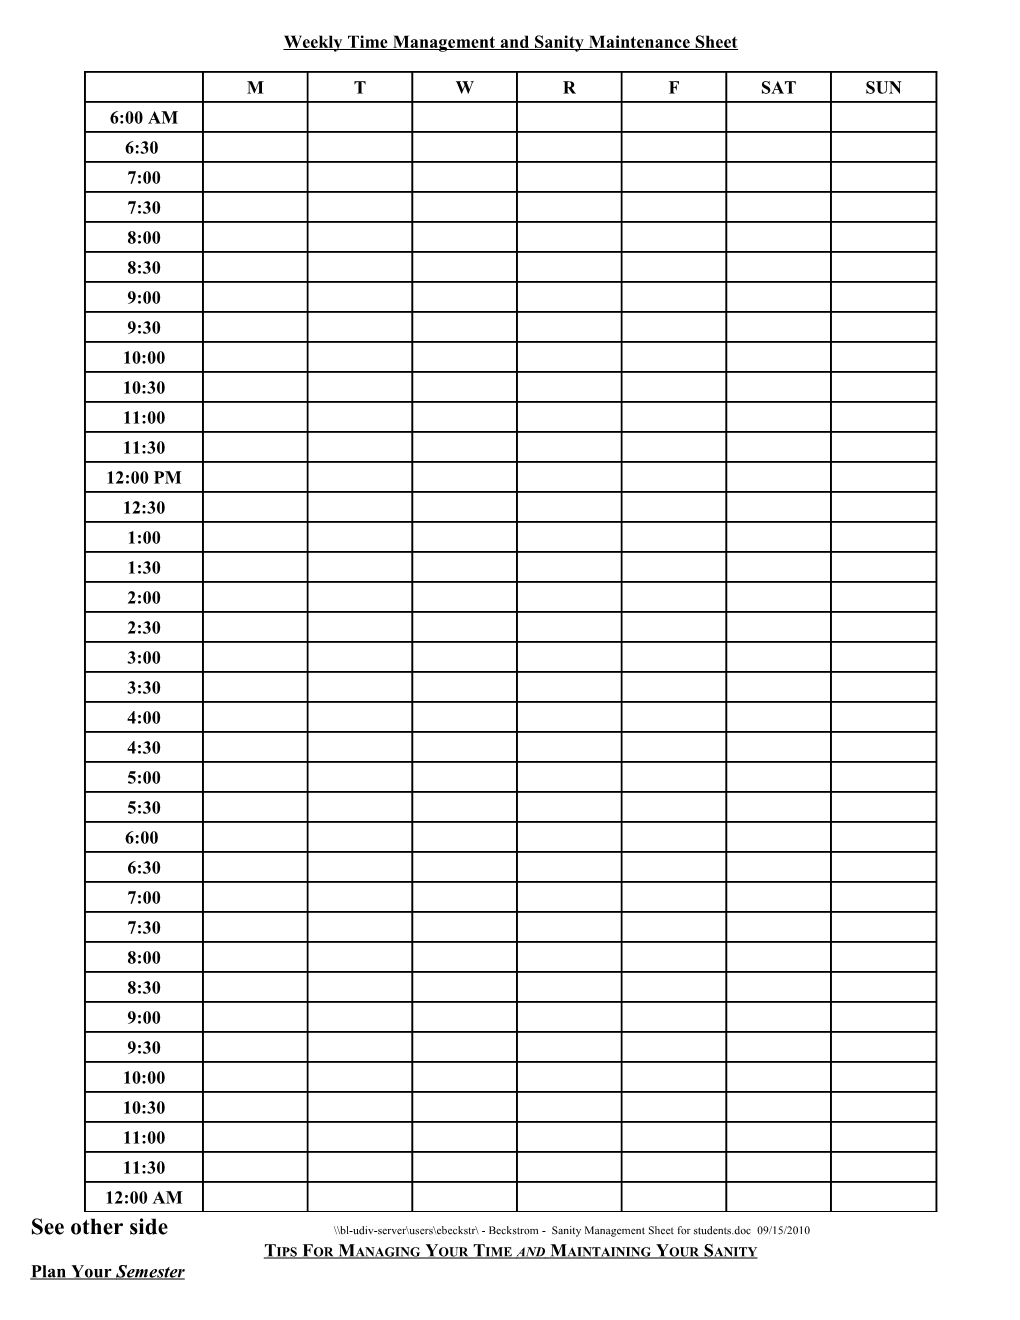 Weekly Time Management and Sanity Maintenance Sheet